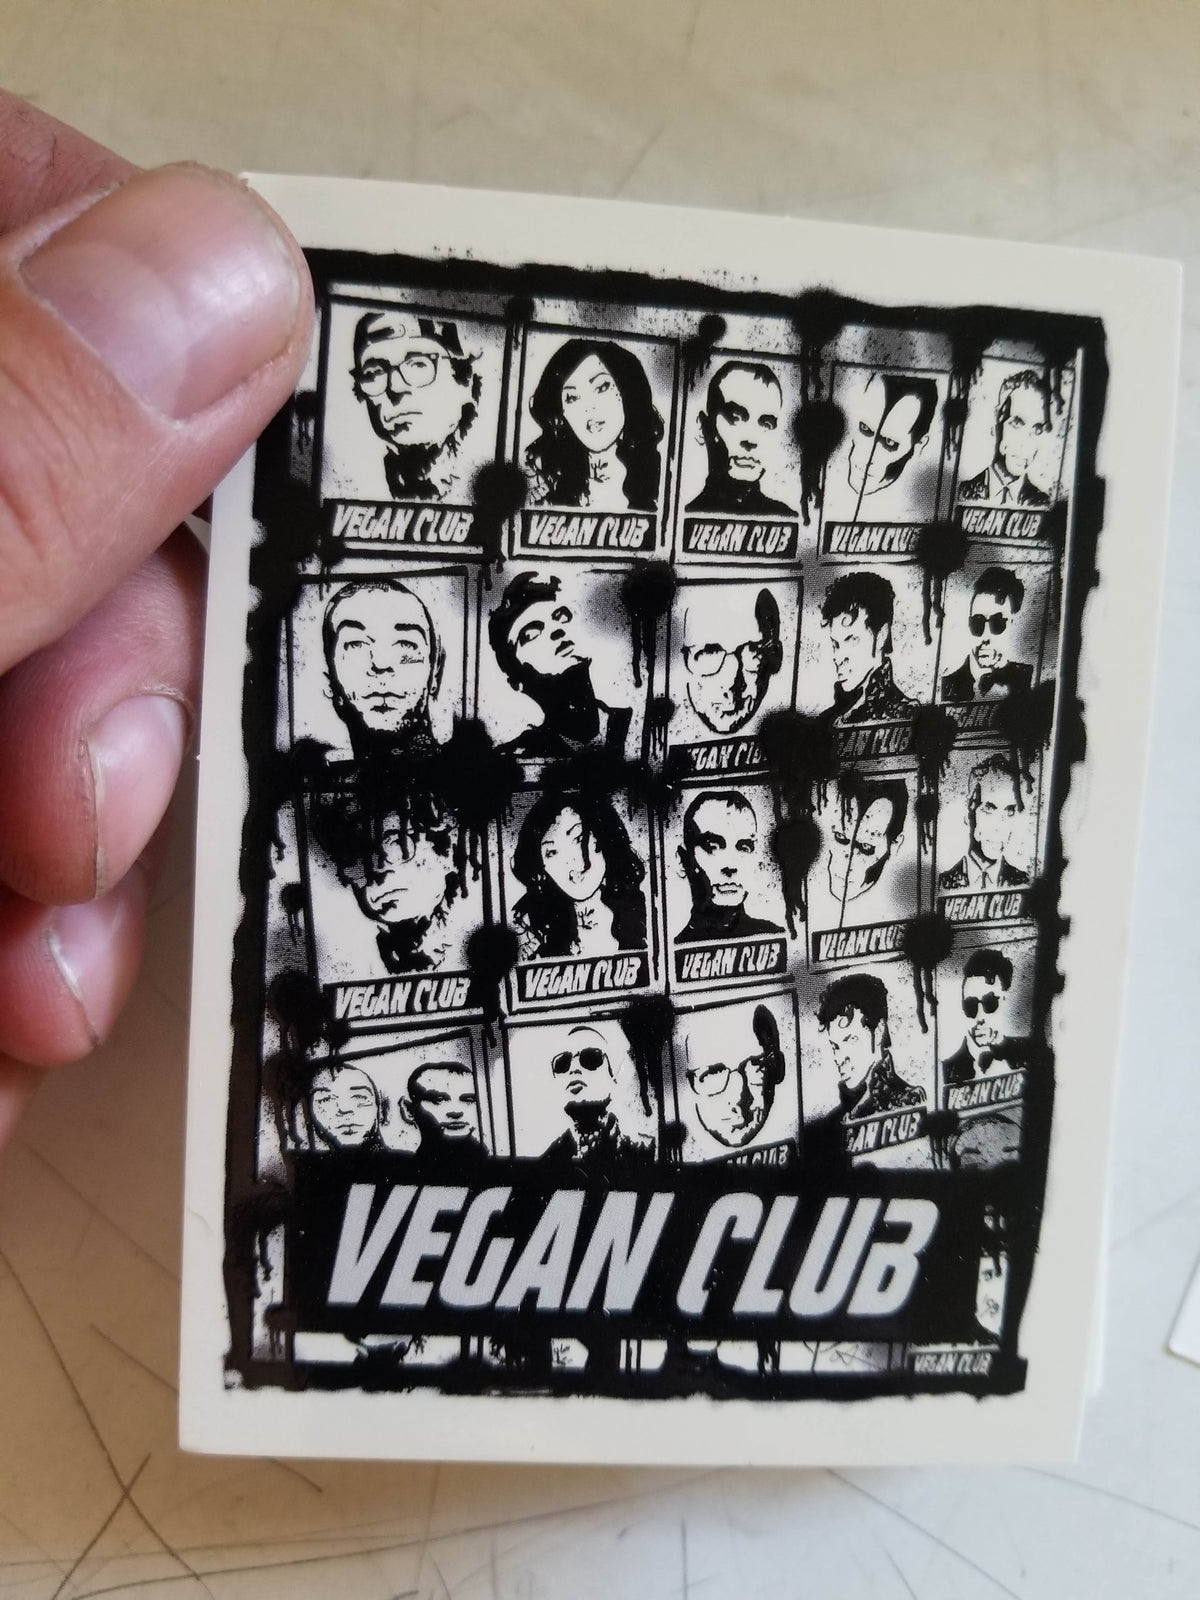 SOLD OUT - 12 Vegan Club Stickers collab with Anthony Proetta Jr